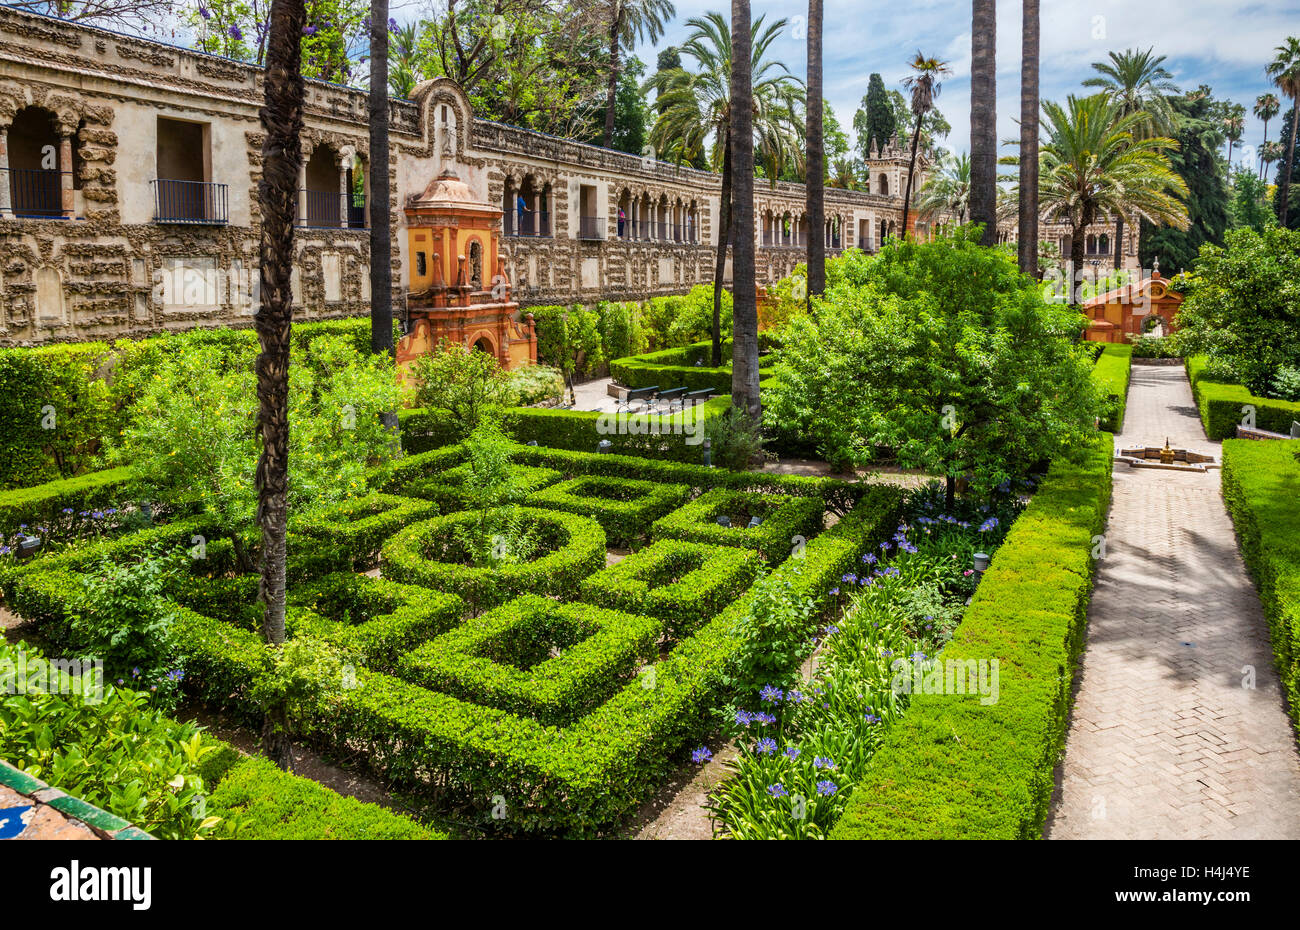 Spain, Andalusia, Province of Seville, Seville, the gardens of the Alcazar palace Stock Photo